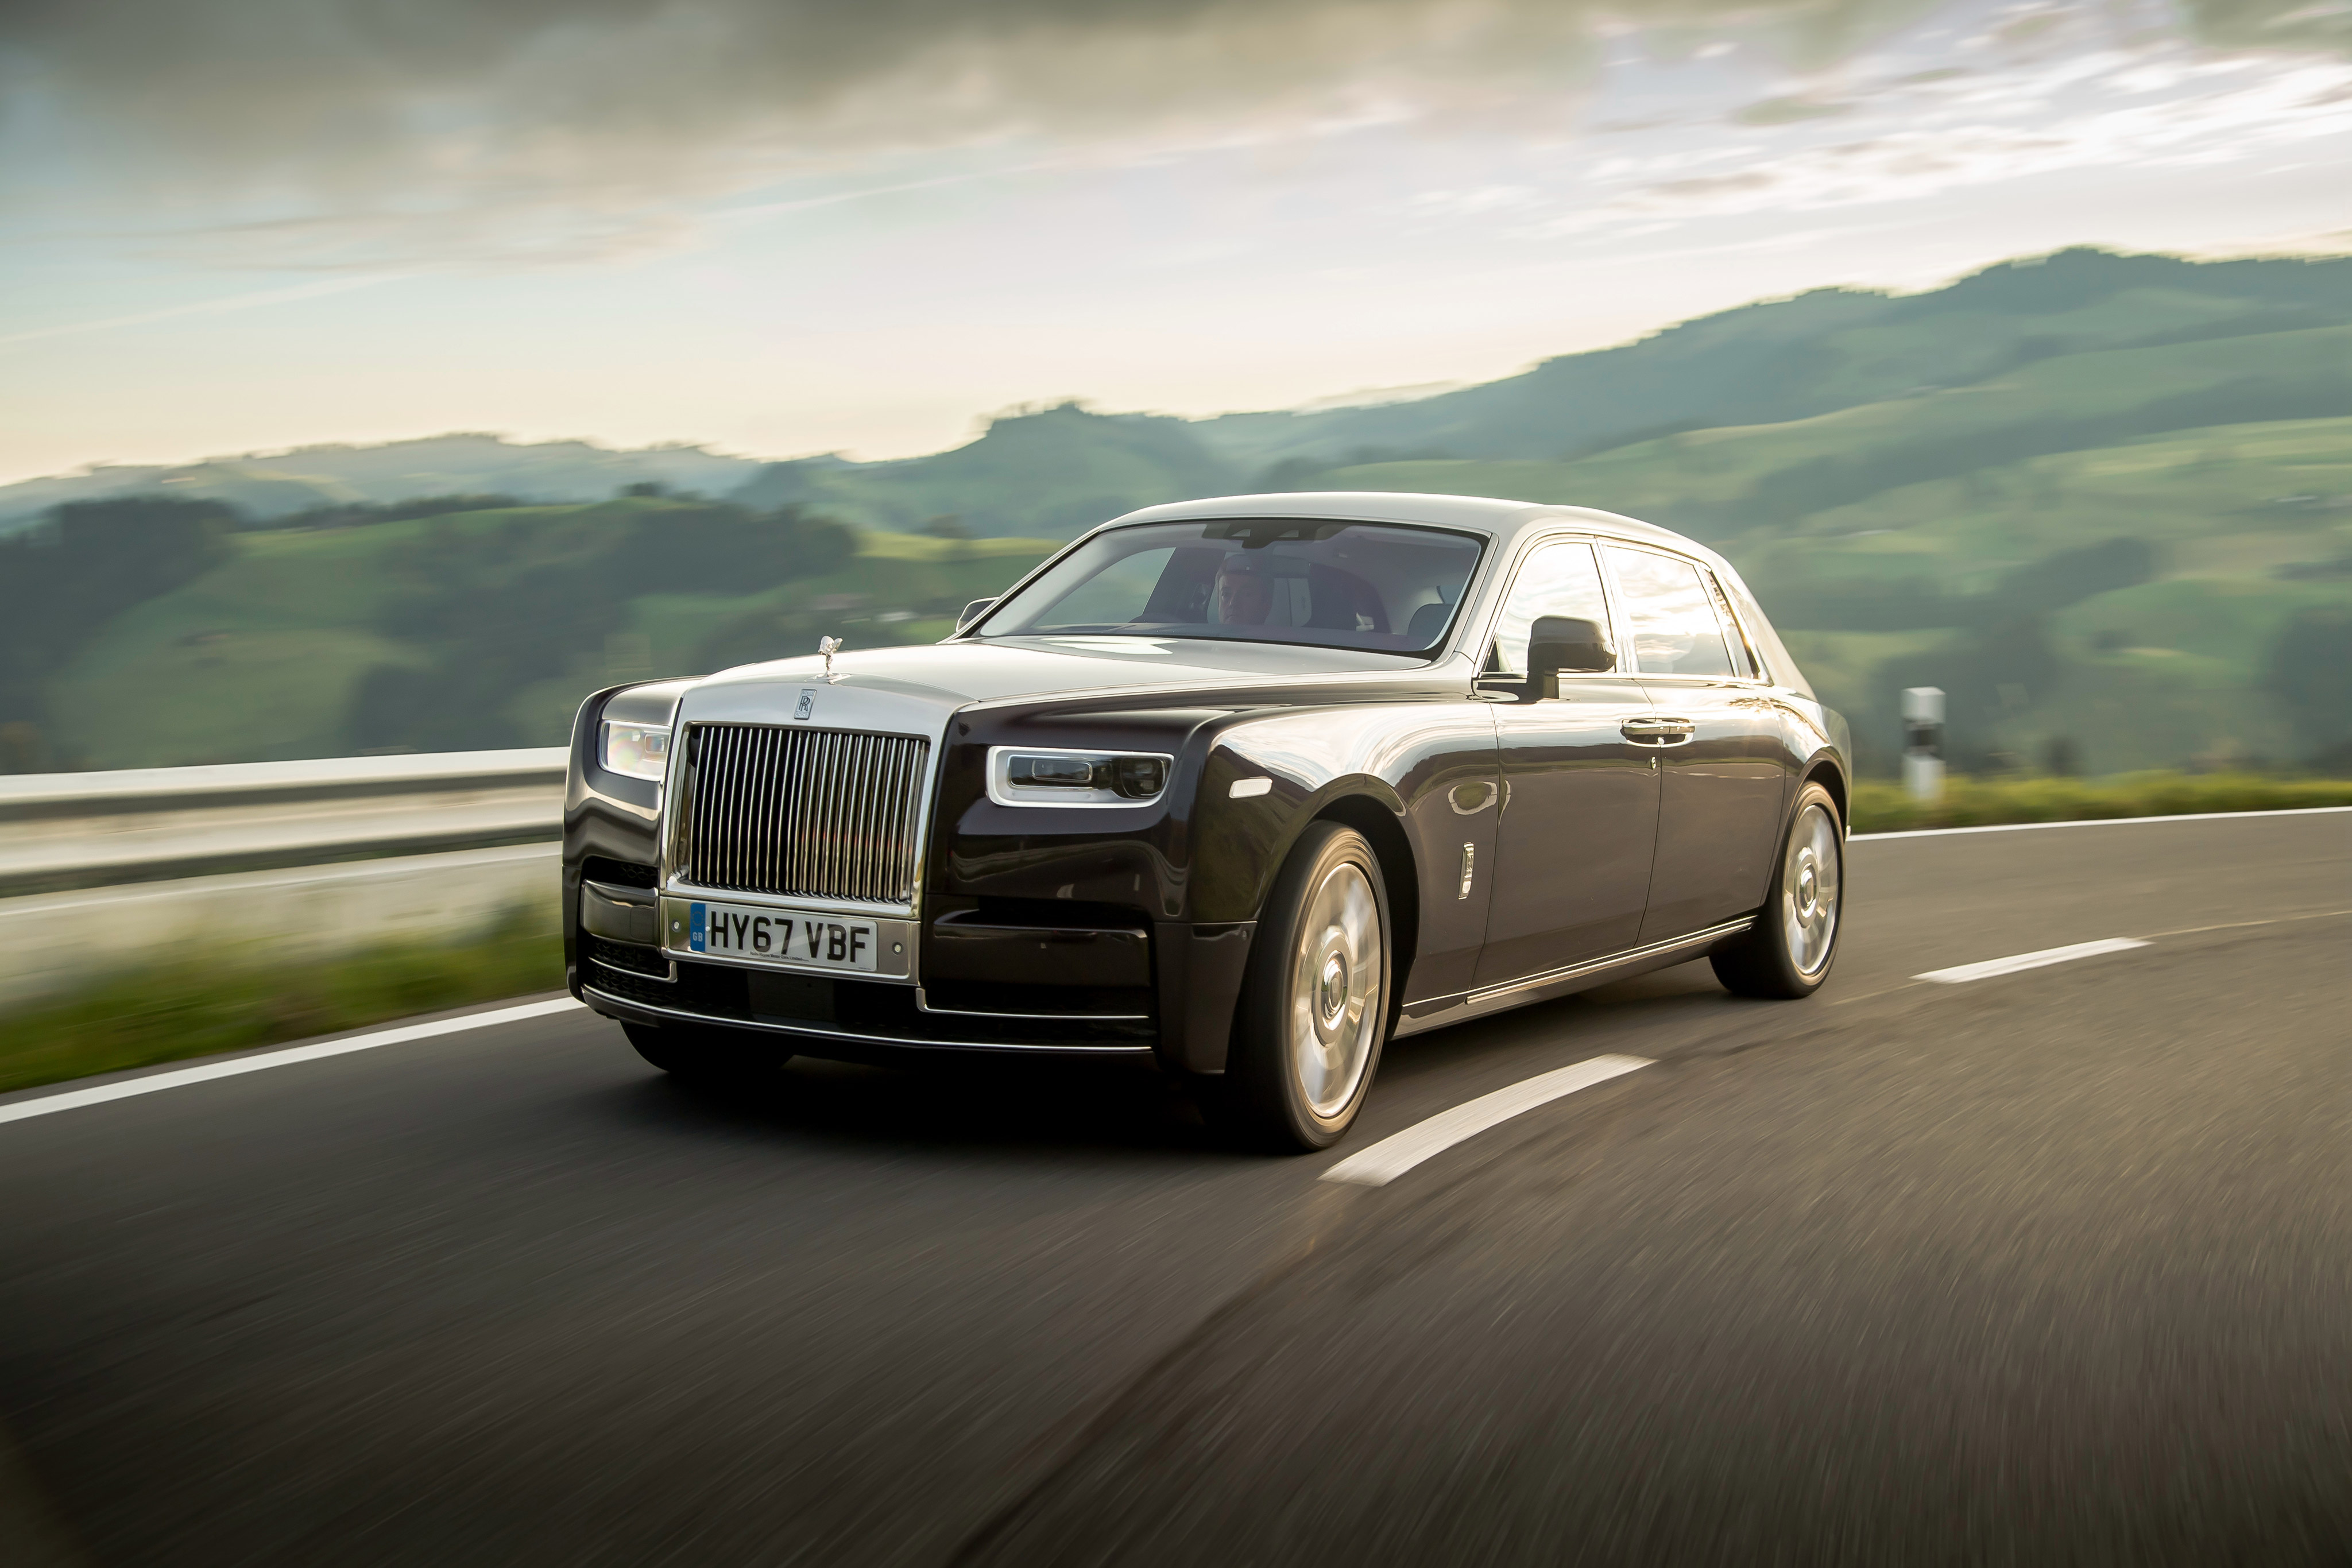 General 4096x2731 car Rolls-Royce luxury cars British cars frontal view road vehicle clouds sky licence plates sunlight